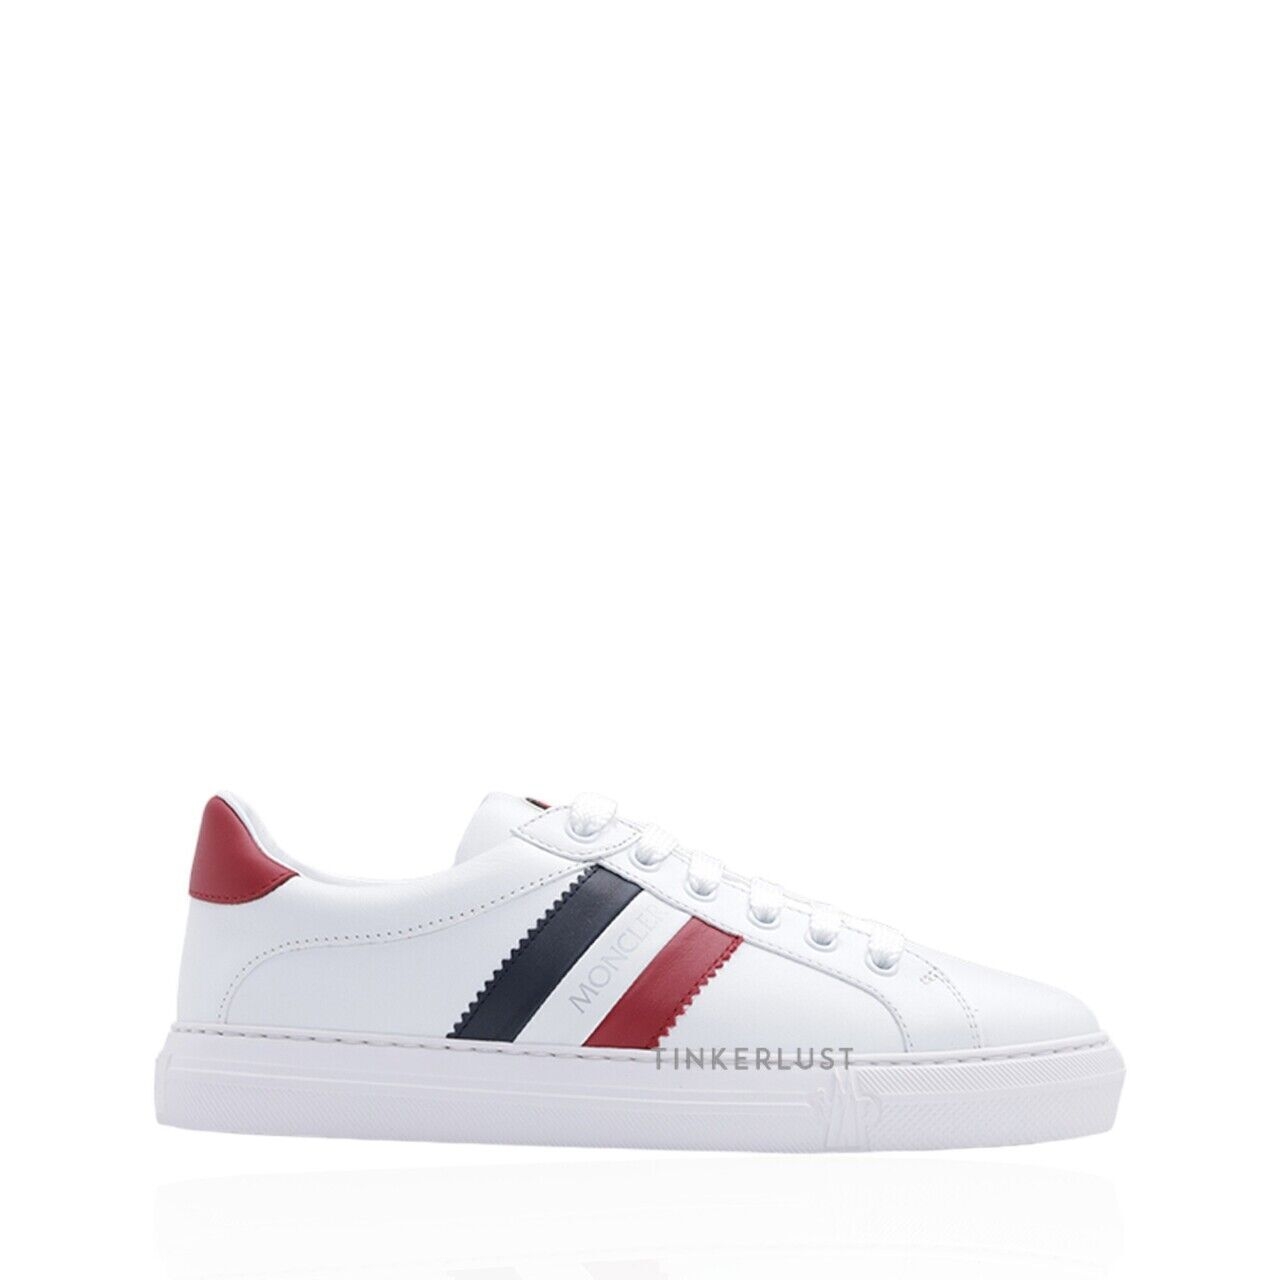 Moncler Women Ariel Tennis Sneakers in White with Iconic Band 